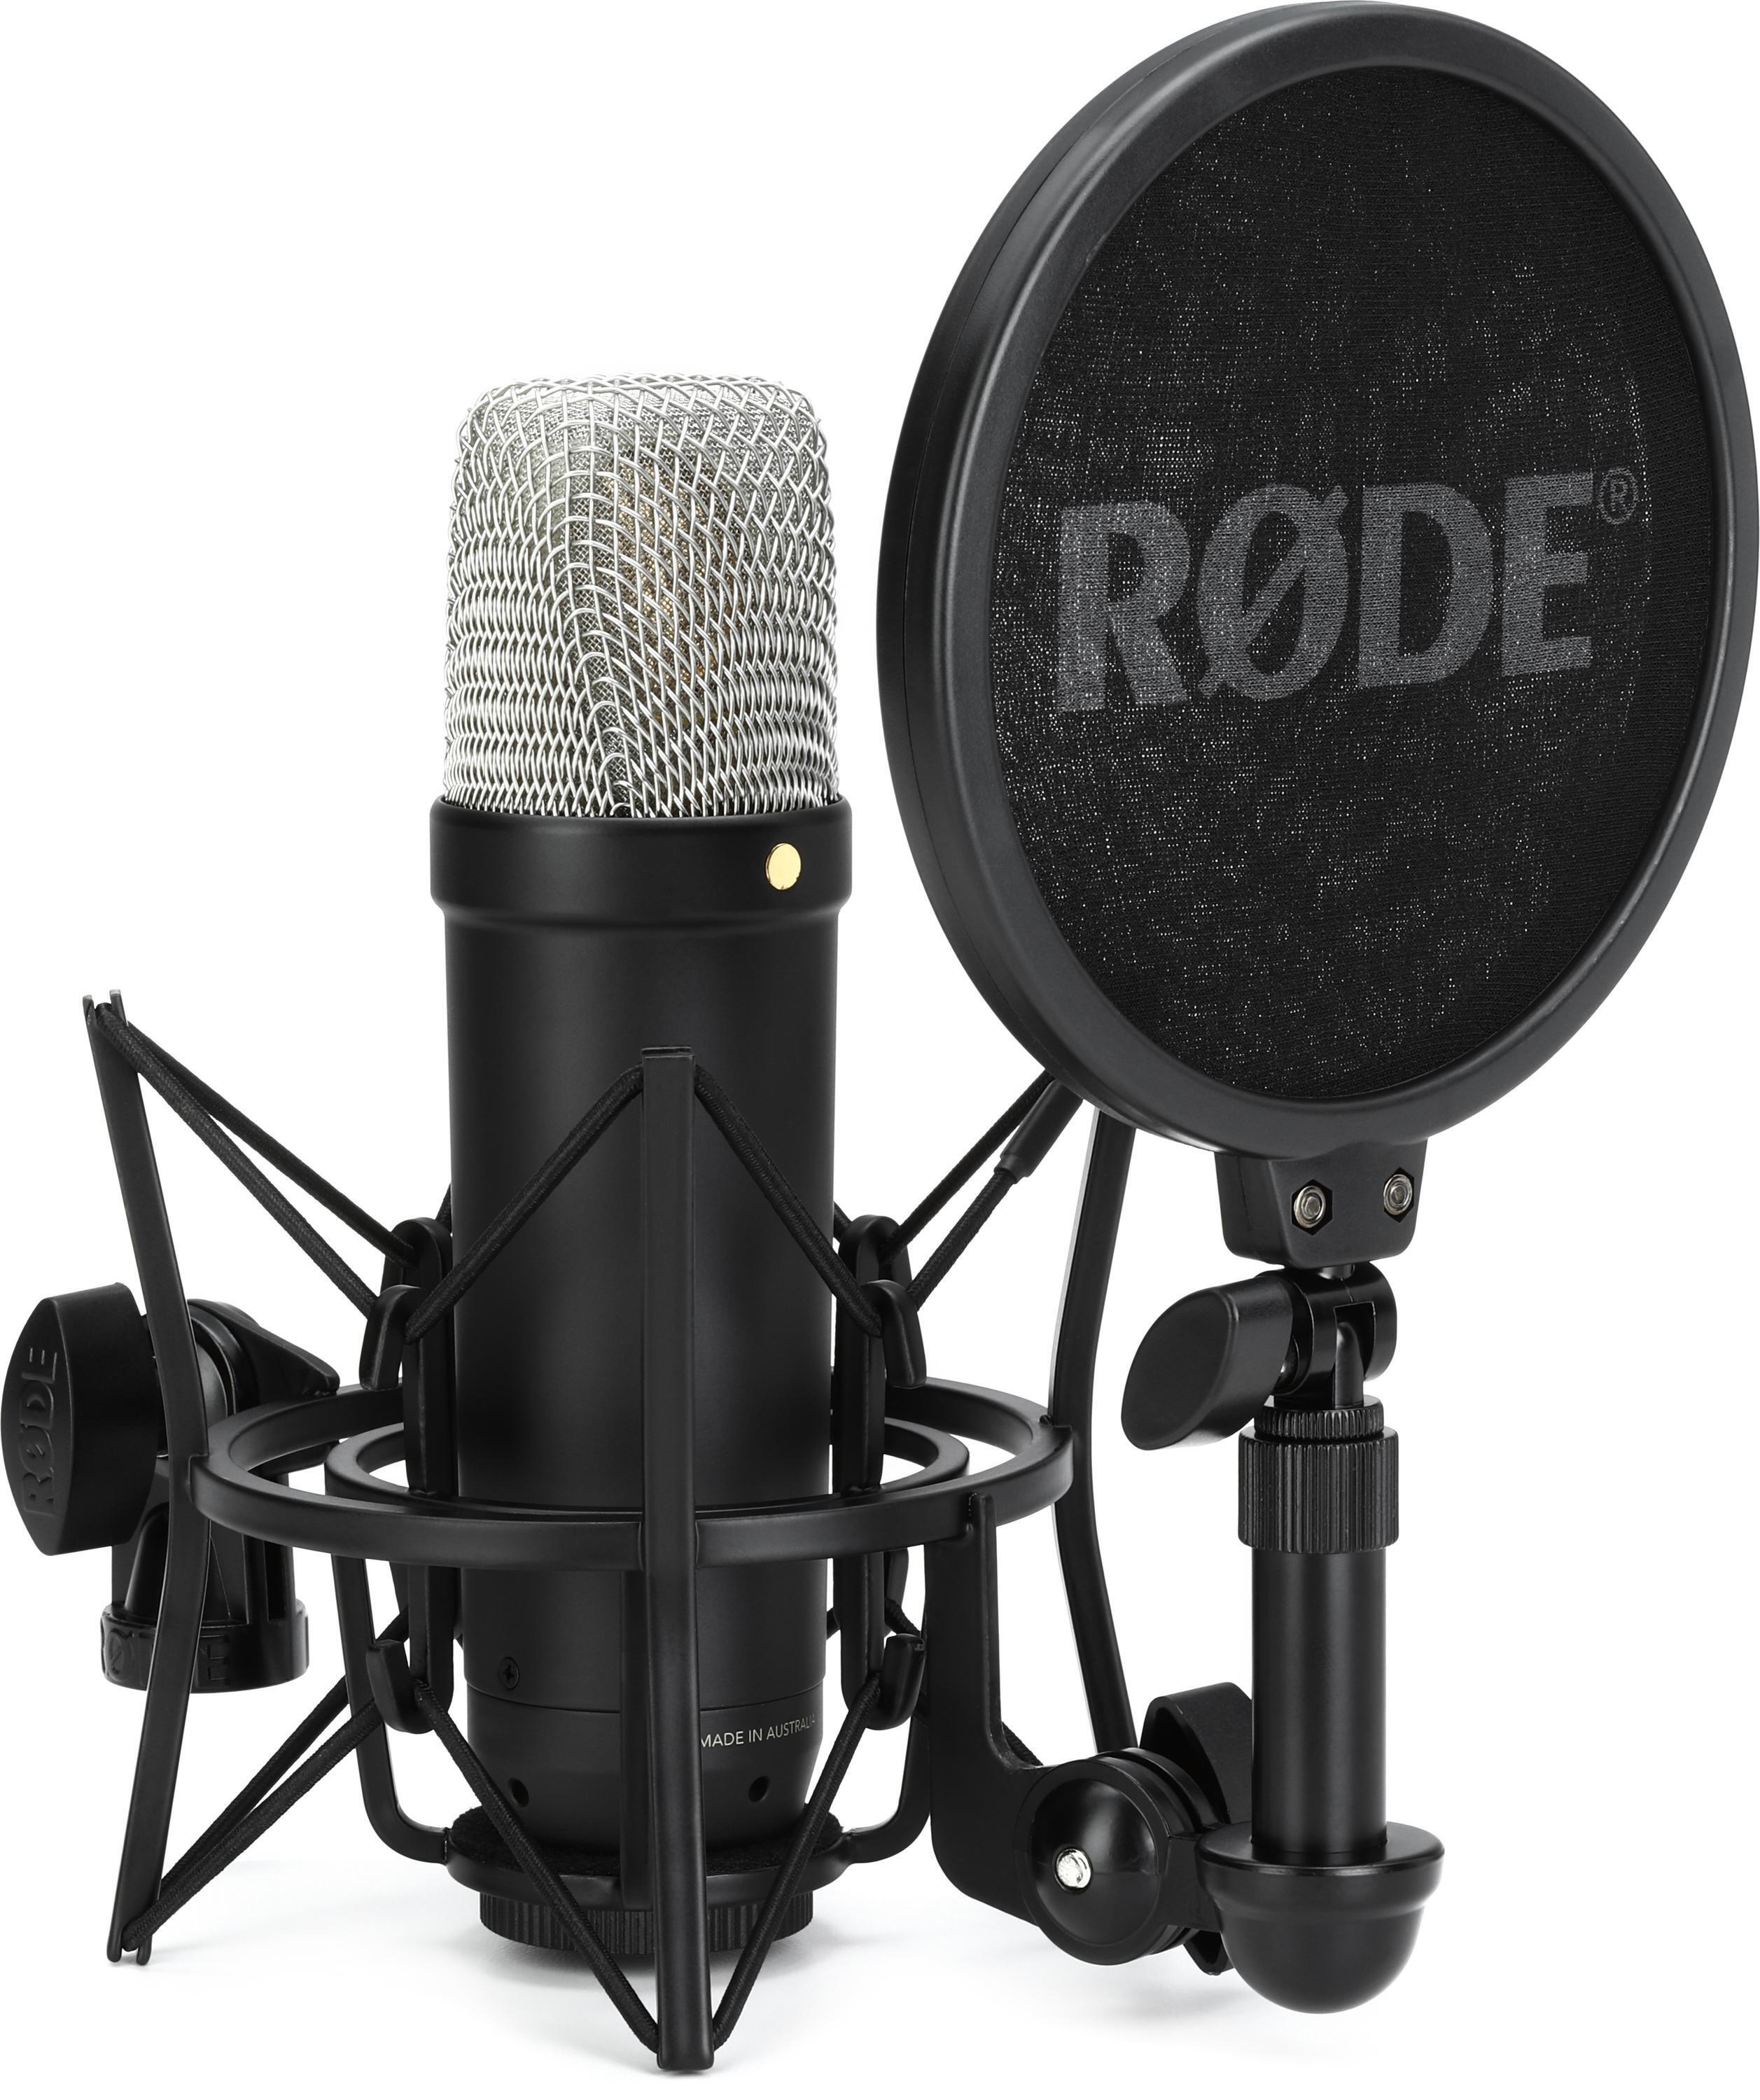 Bundled Item: Rode NT1 5th Generation Condenser Microphone with SM6 Shockmount and Pop Filter - Black